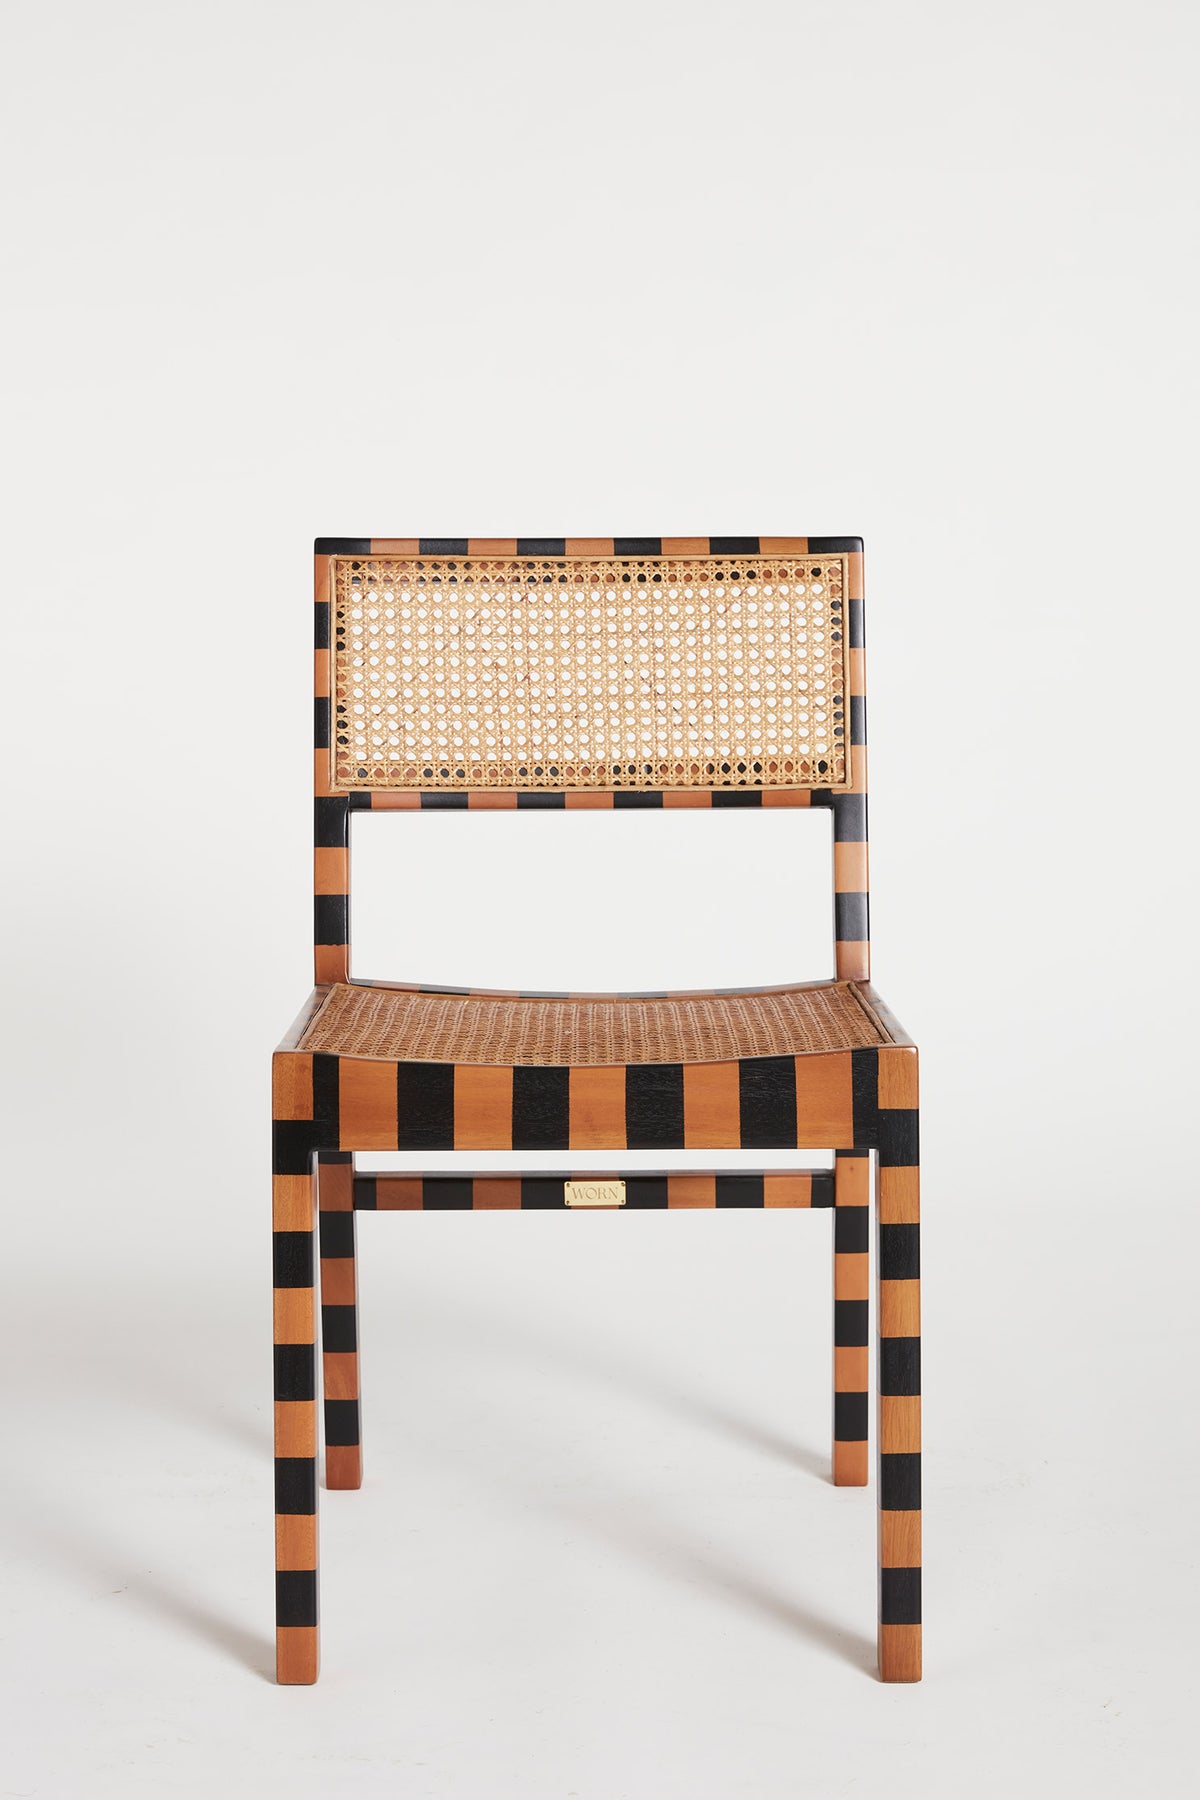 The Stripe Tisse Chair is a dining chair featuring timber frame painted with black and woven stripes. Seat and back both feature woven rattan panels.